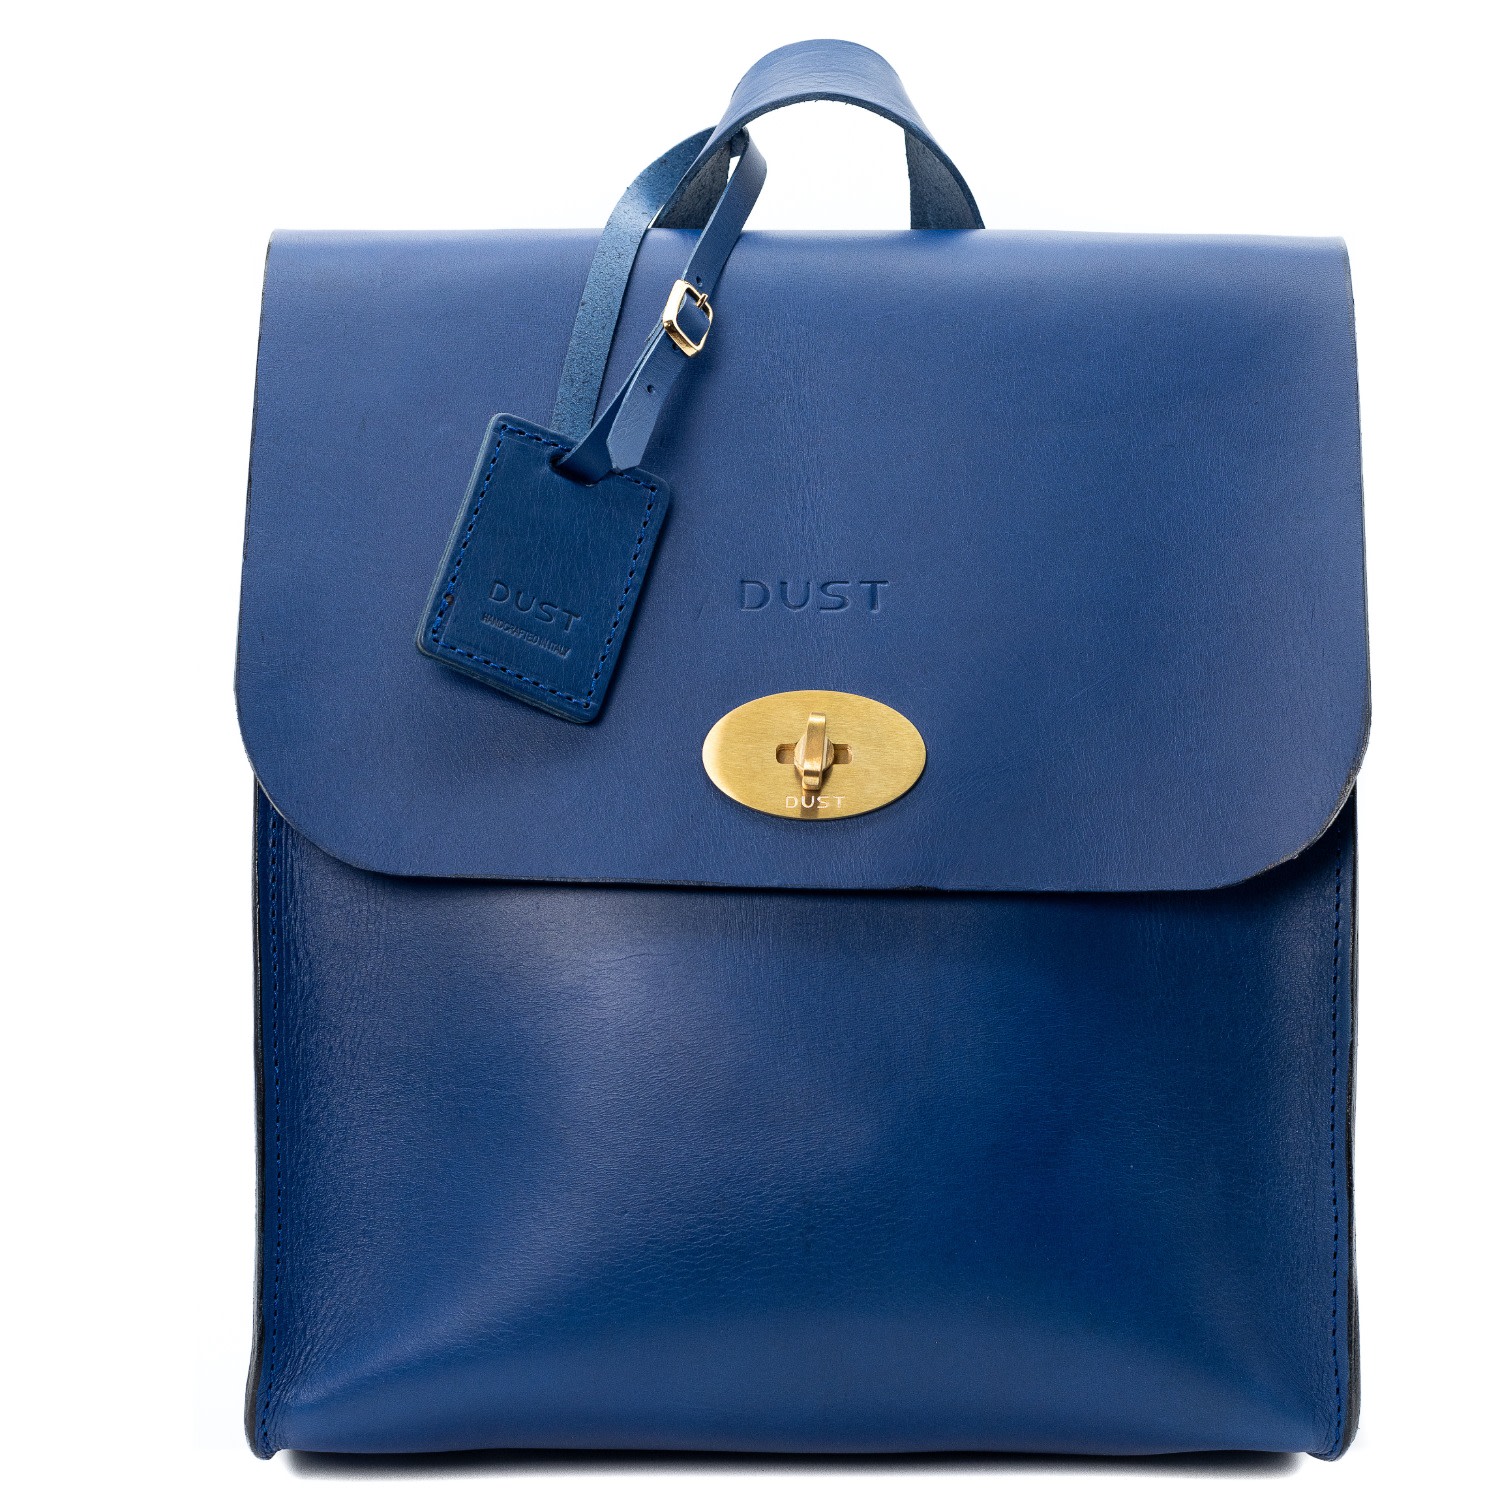 The Dust Company Women's Leather Backpack Blue Artist Collection